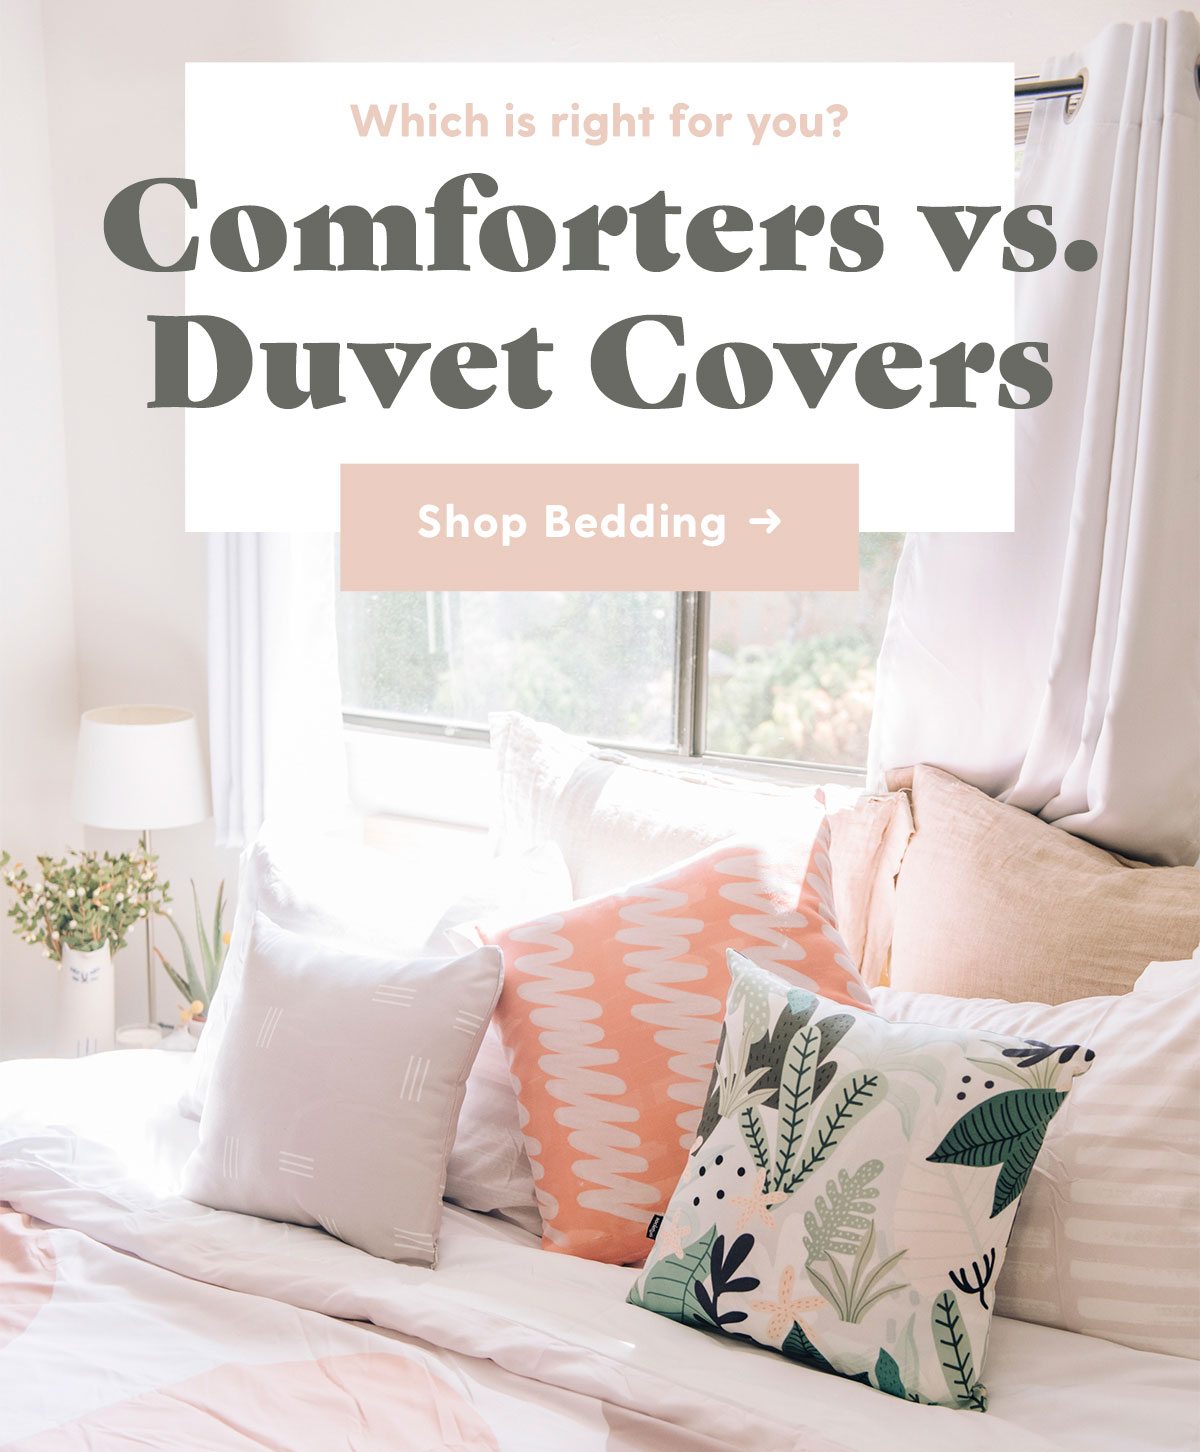 Which is right for you? Comforters vs. Duvet Covers. Shop Bedding →